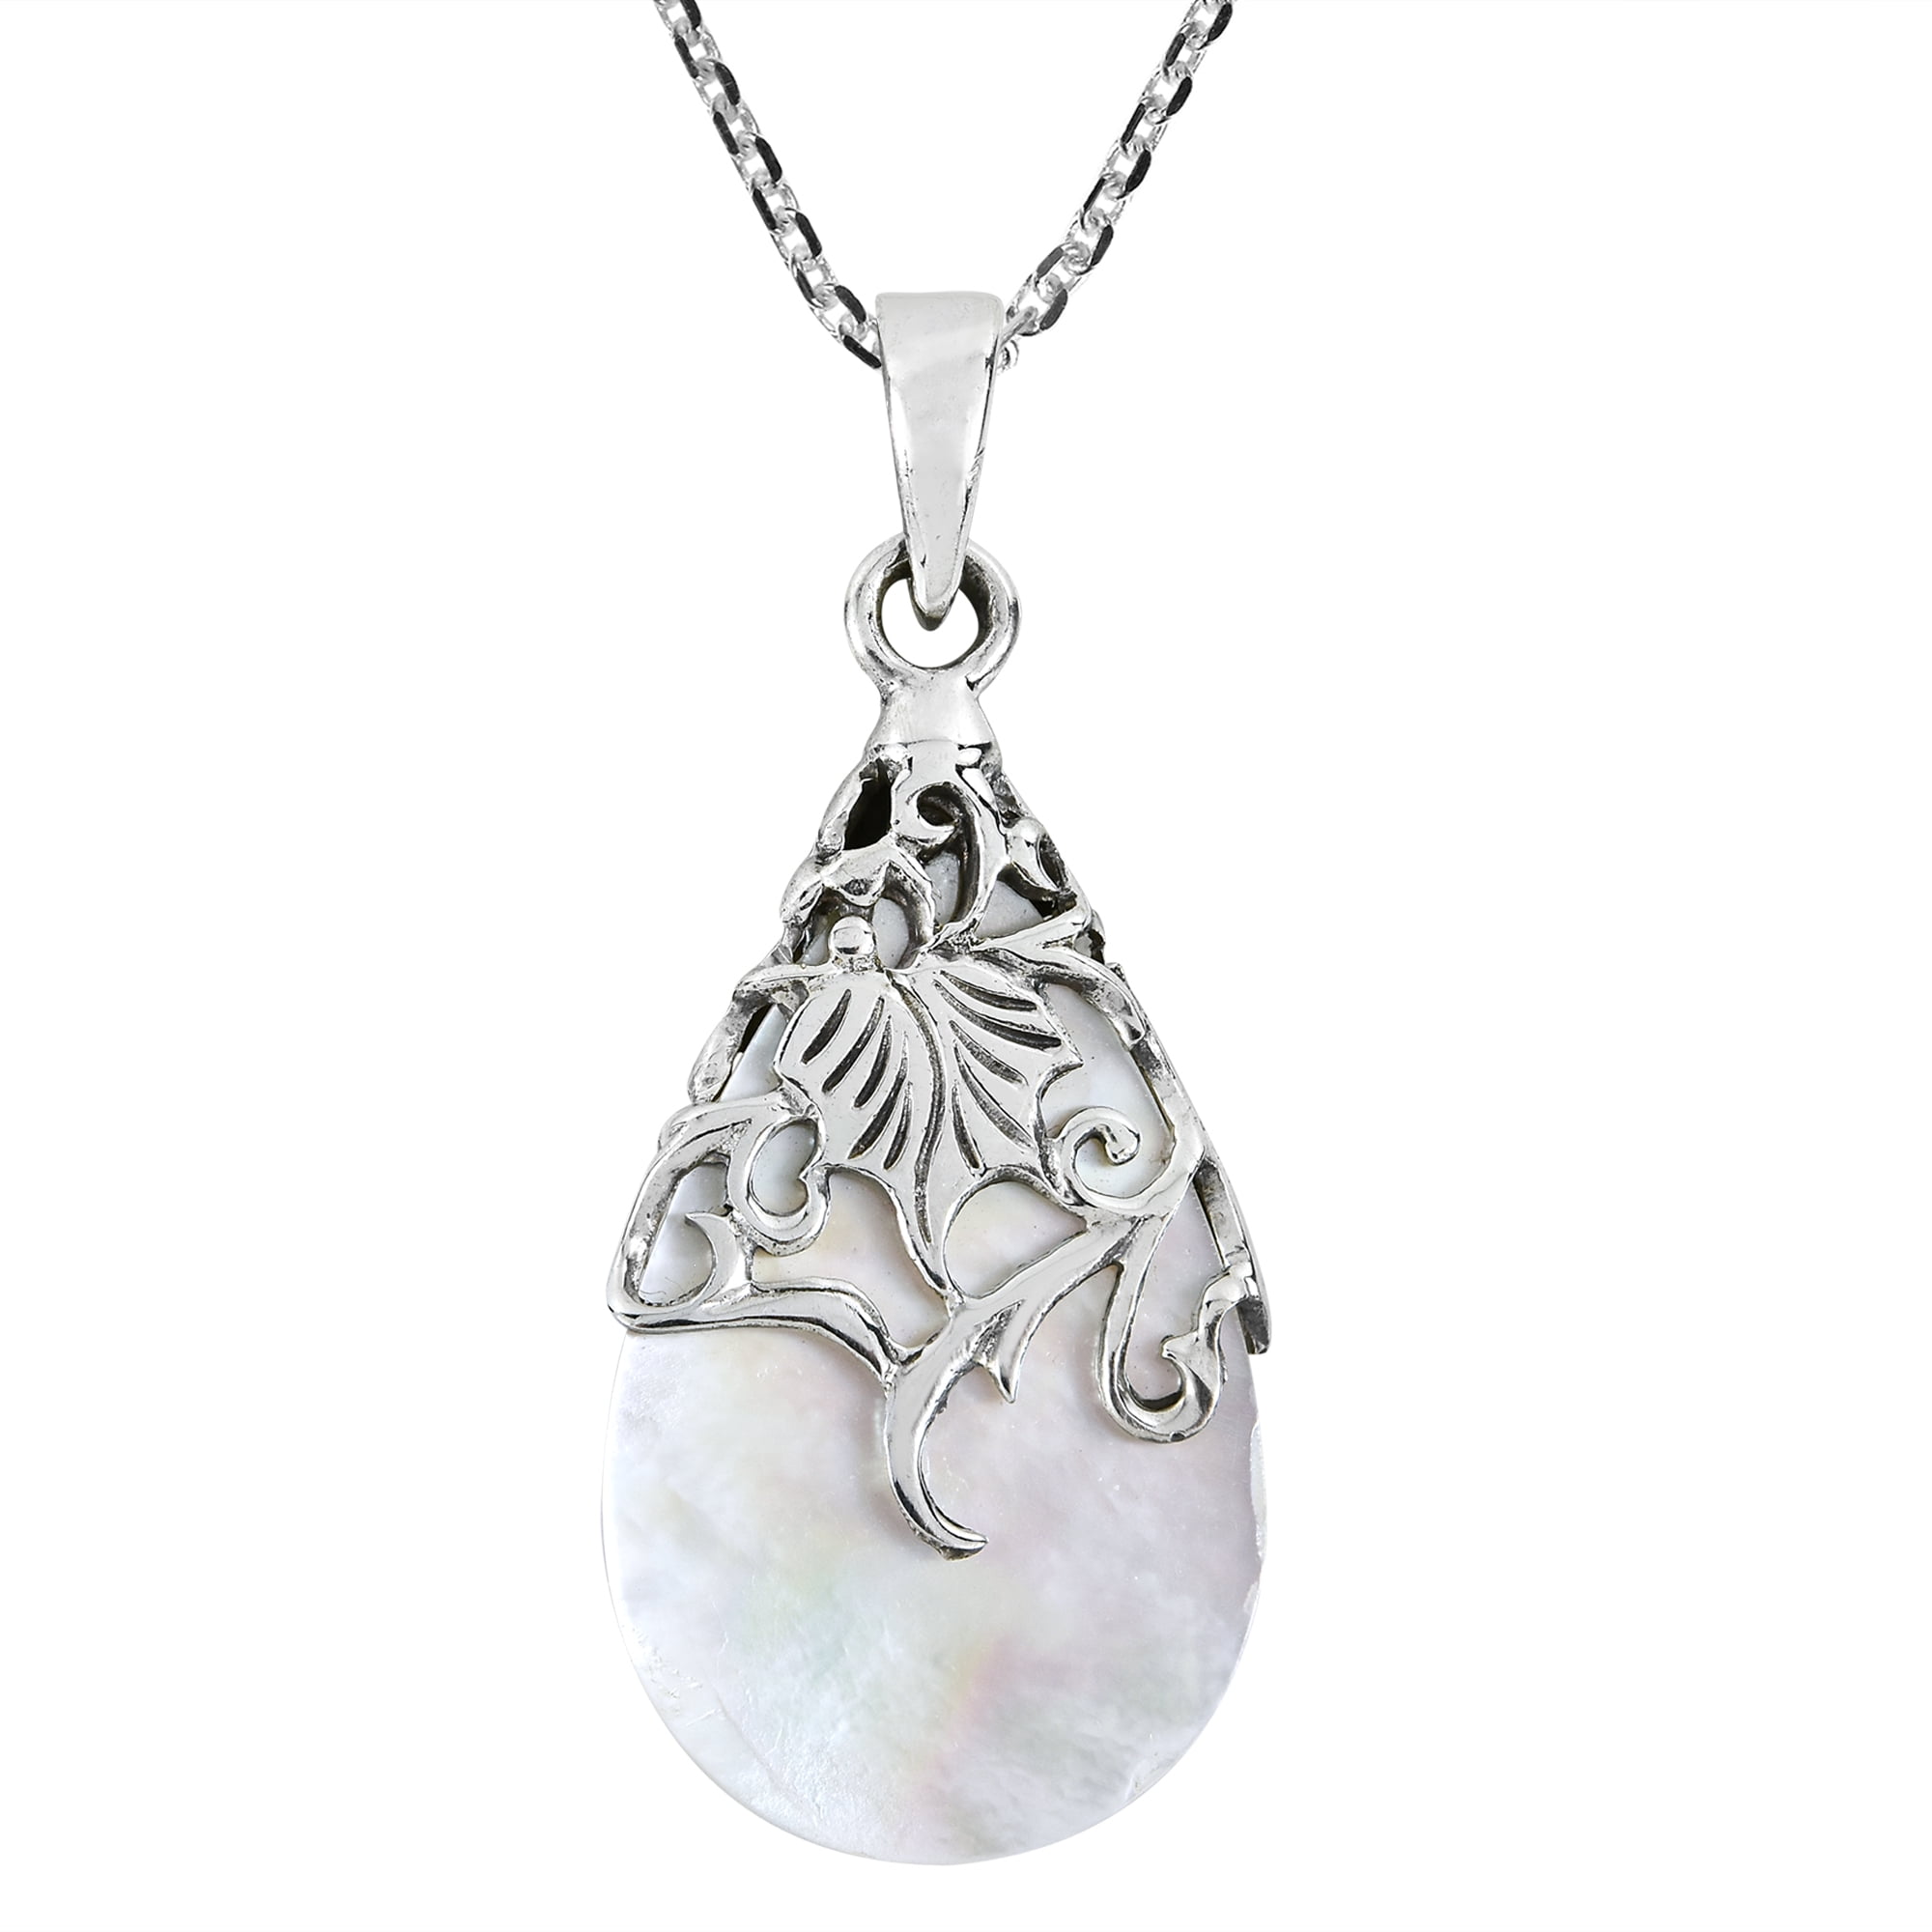 STERLING SILVER FILIGREE LOCKET  WITH MOTHER OF PEARL INSET ON SILVER 18" CHAIN 